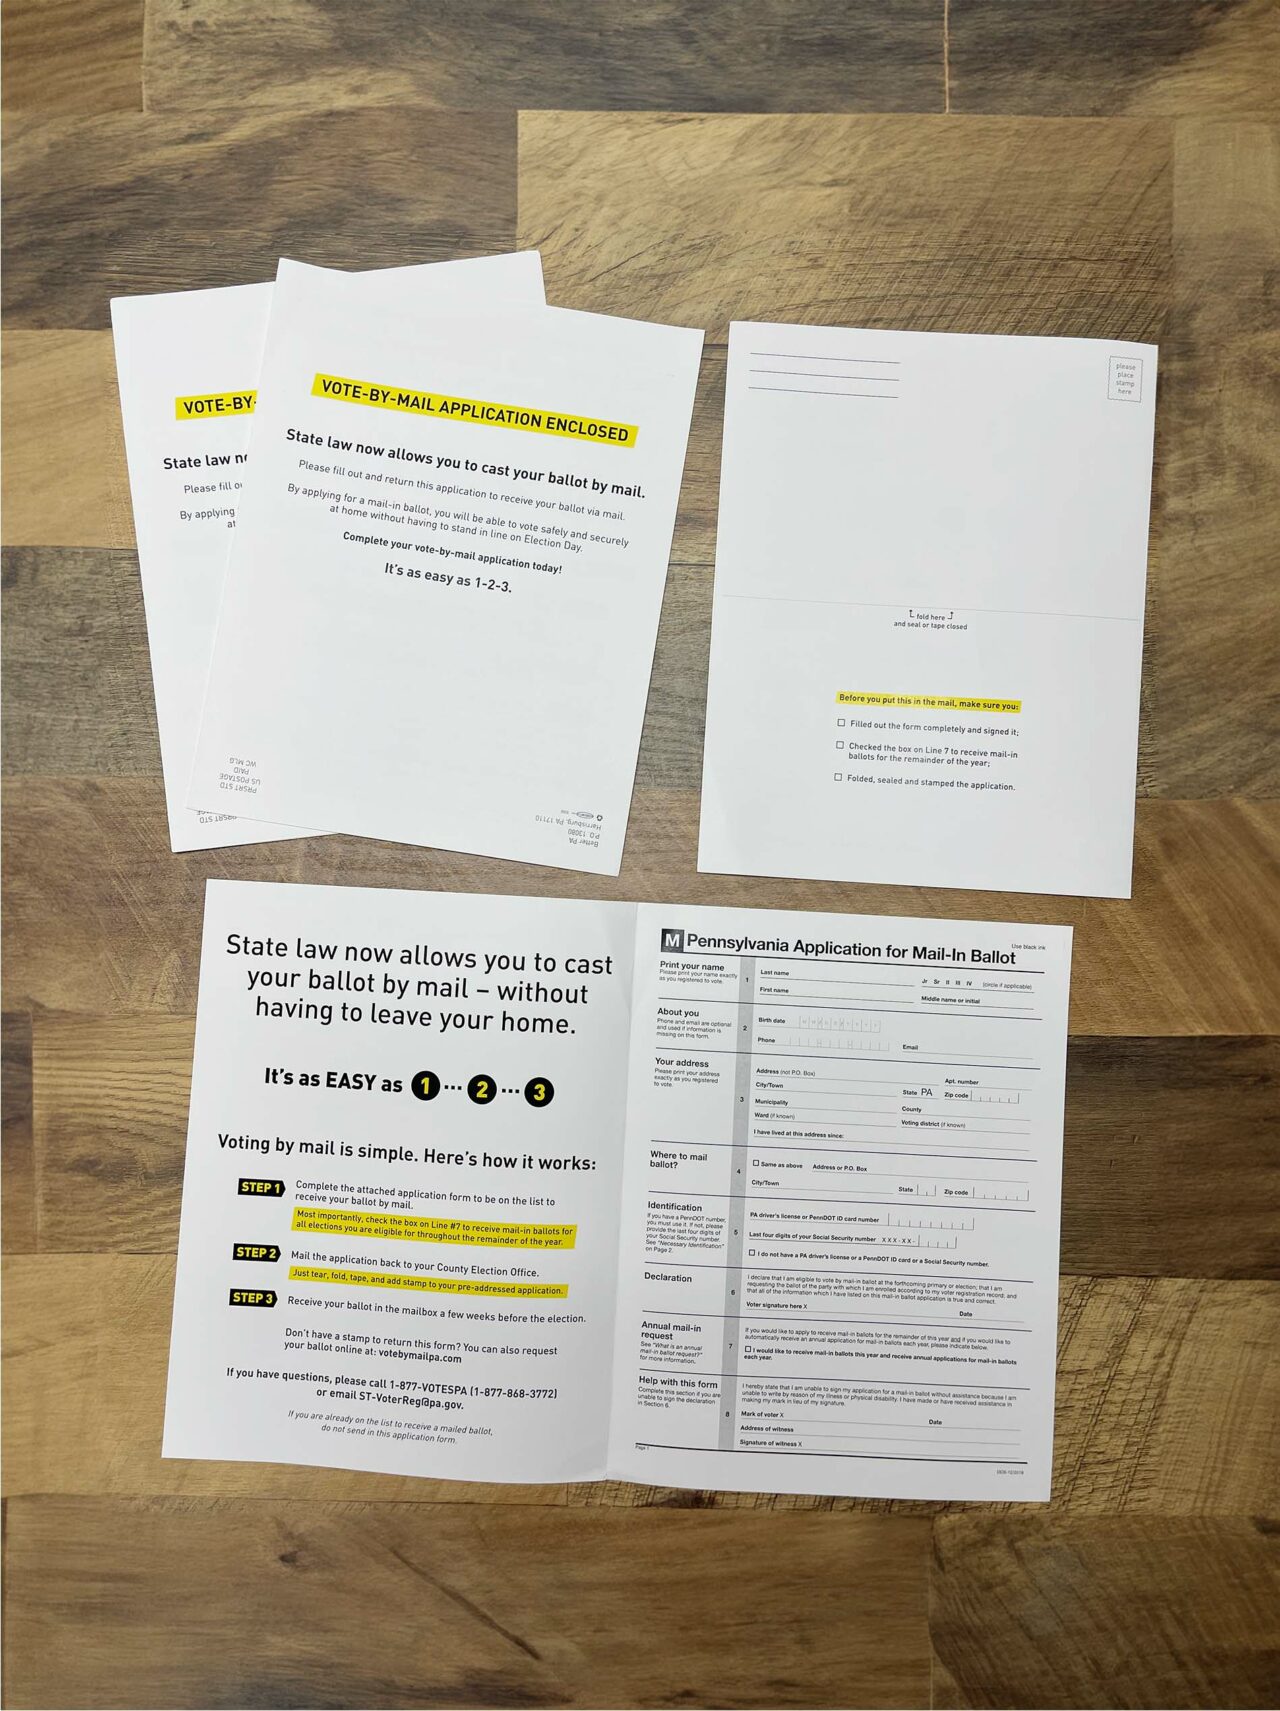 Example of Morel's print, political, and direct mail capabilities, showing an application for a mail-in ballot